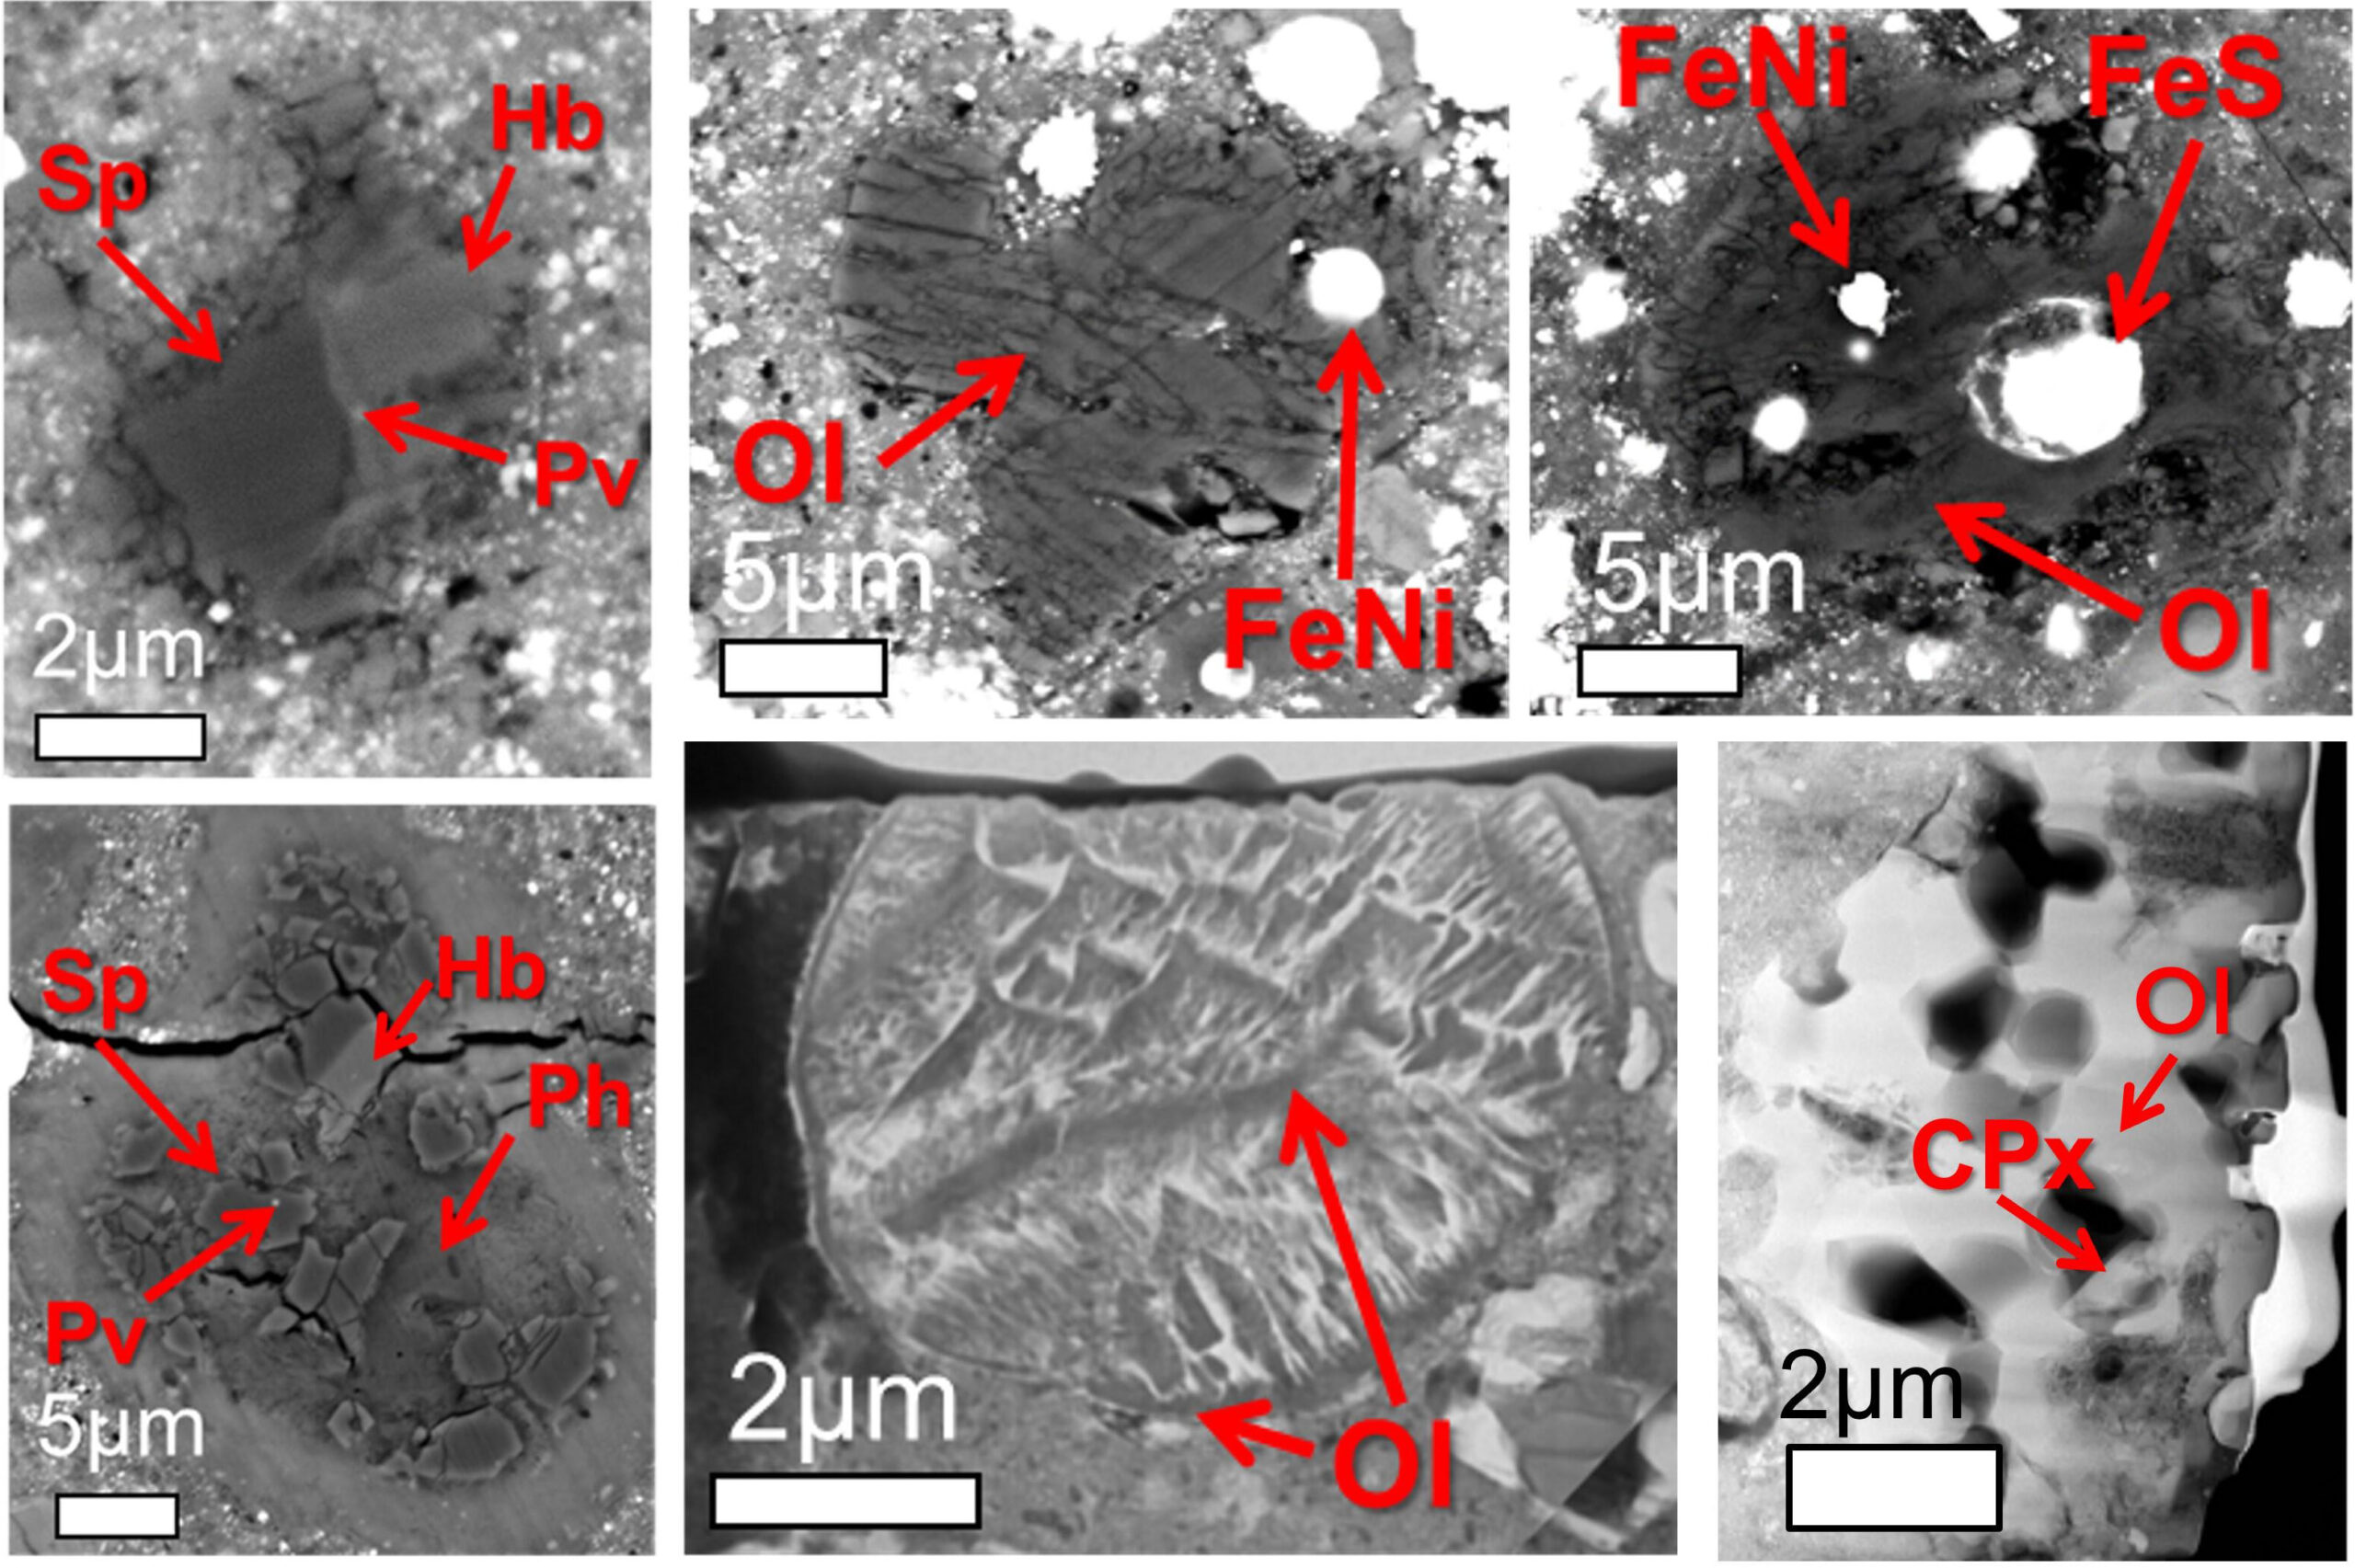 Particles formed in high temperature environments (over 1000°C) found in Ryugu samples (all electron micrographs). (A, B) Inclusions rich in calcium and aluminum, (B-D) spherulites formed from fused olivine (Ol), metallic iron (FeNi), and iron sulfide (FeS), (F) similar to stone aggregates Porous particles